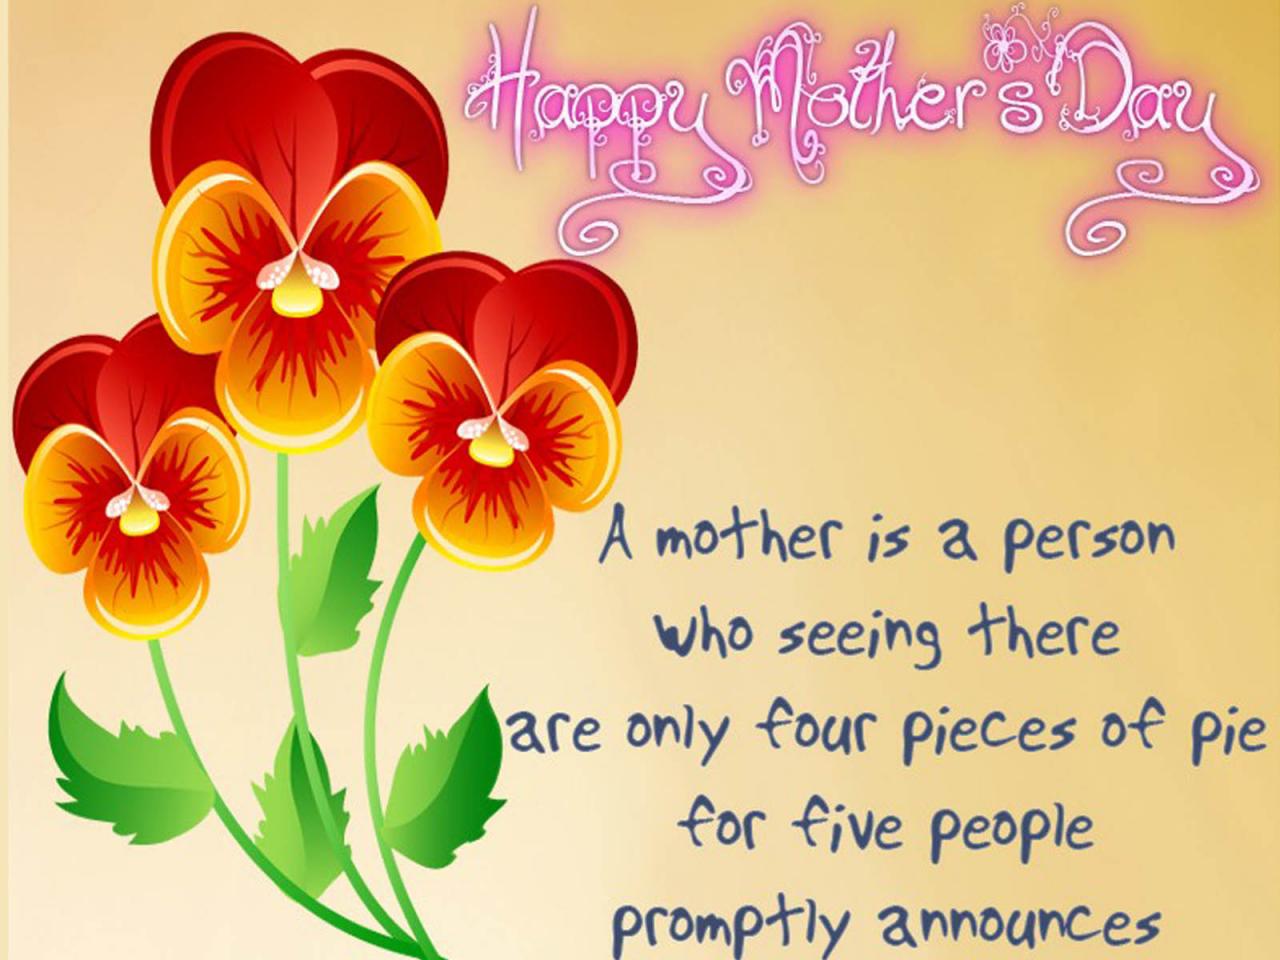 Happy mother messages wishes quotes cards mom greetings greeting mothers beautiful postcards loving send these latestly credits file